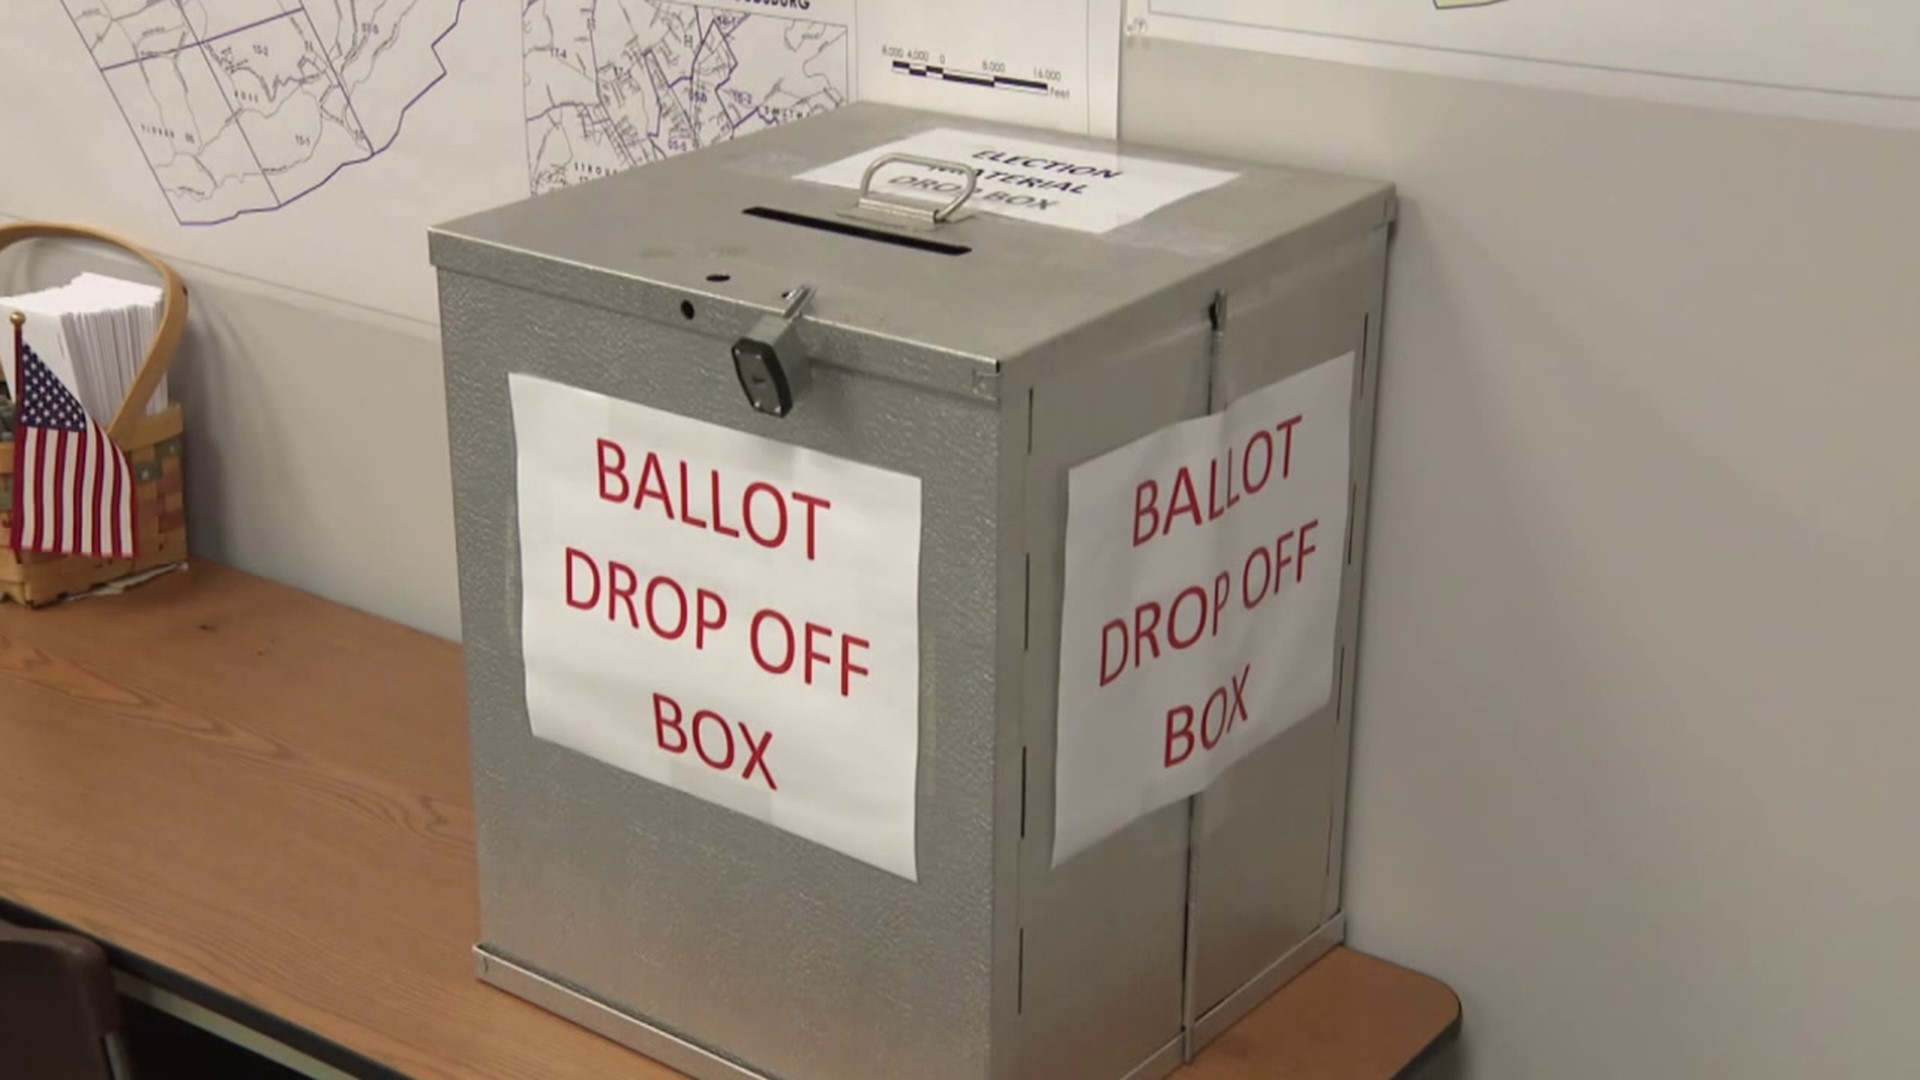 The question of ballot drop boxes was on the table Tuesday night in Luzerne County, leading to a contentious meeting at the county courthouse.